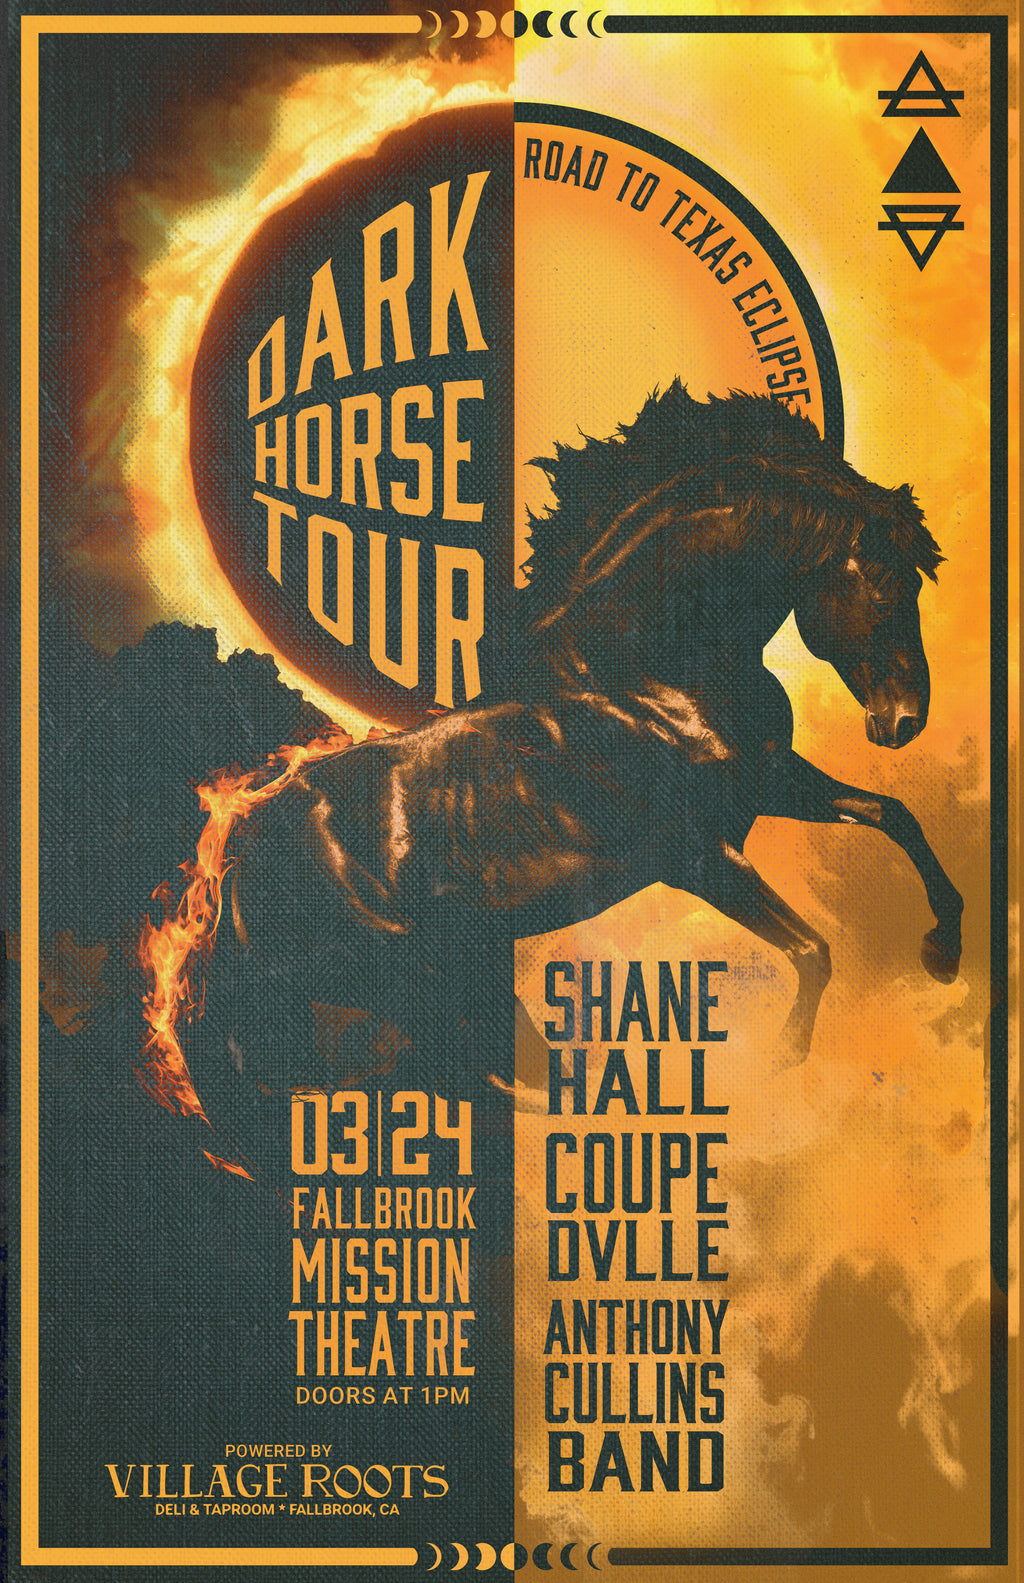 Shane Hall Coupe Dvlle and Anthony Cullins Band Tickets @ Fallbrook Mission Theater